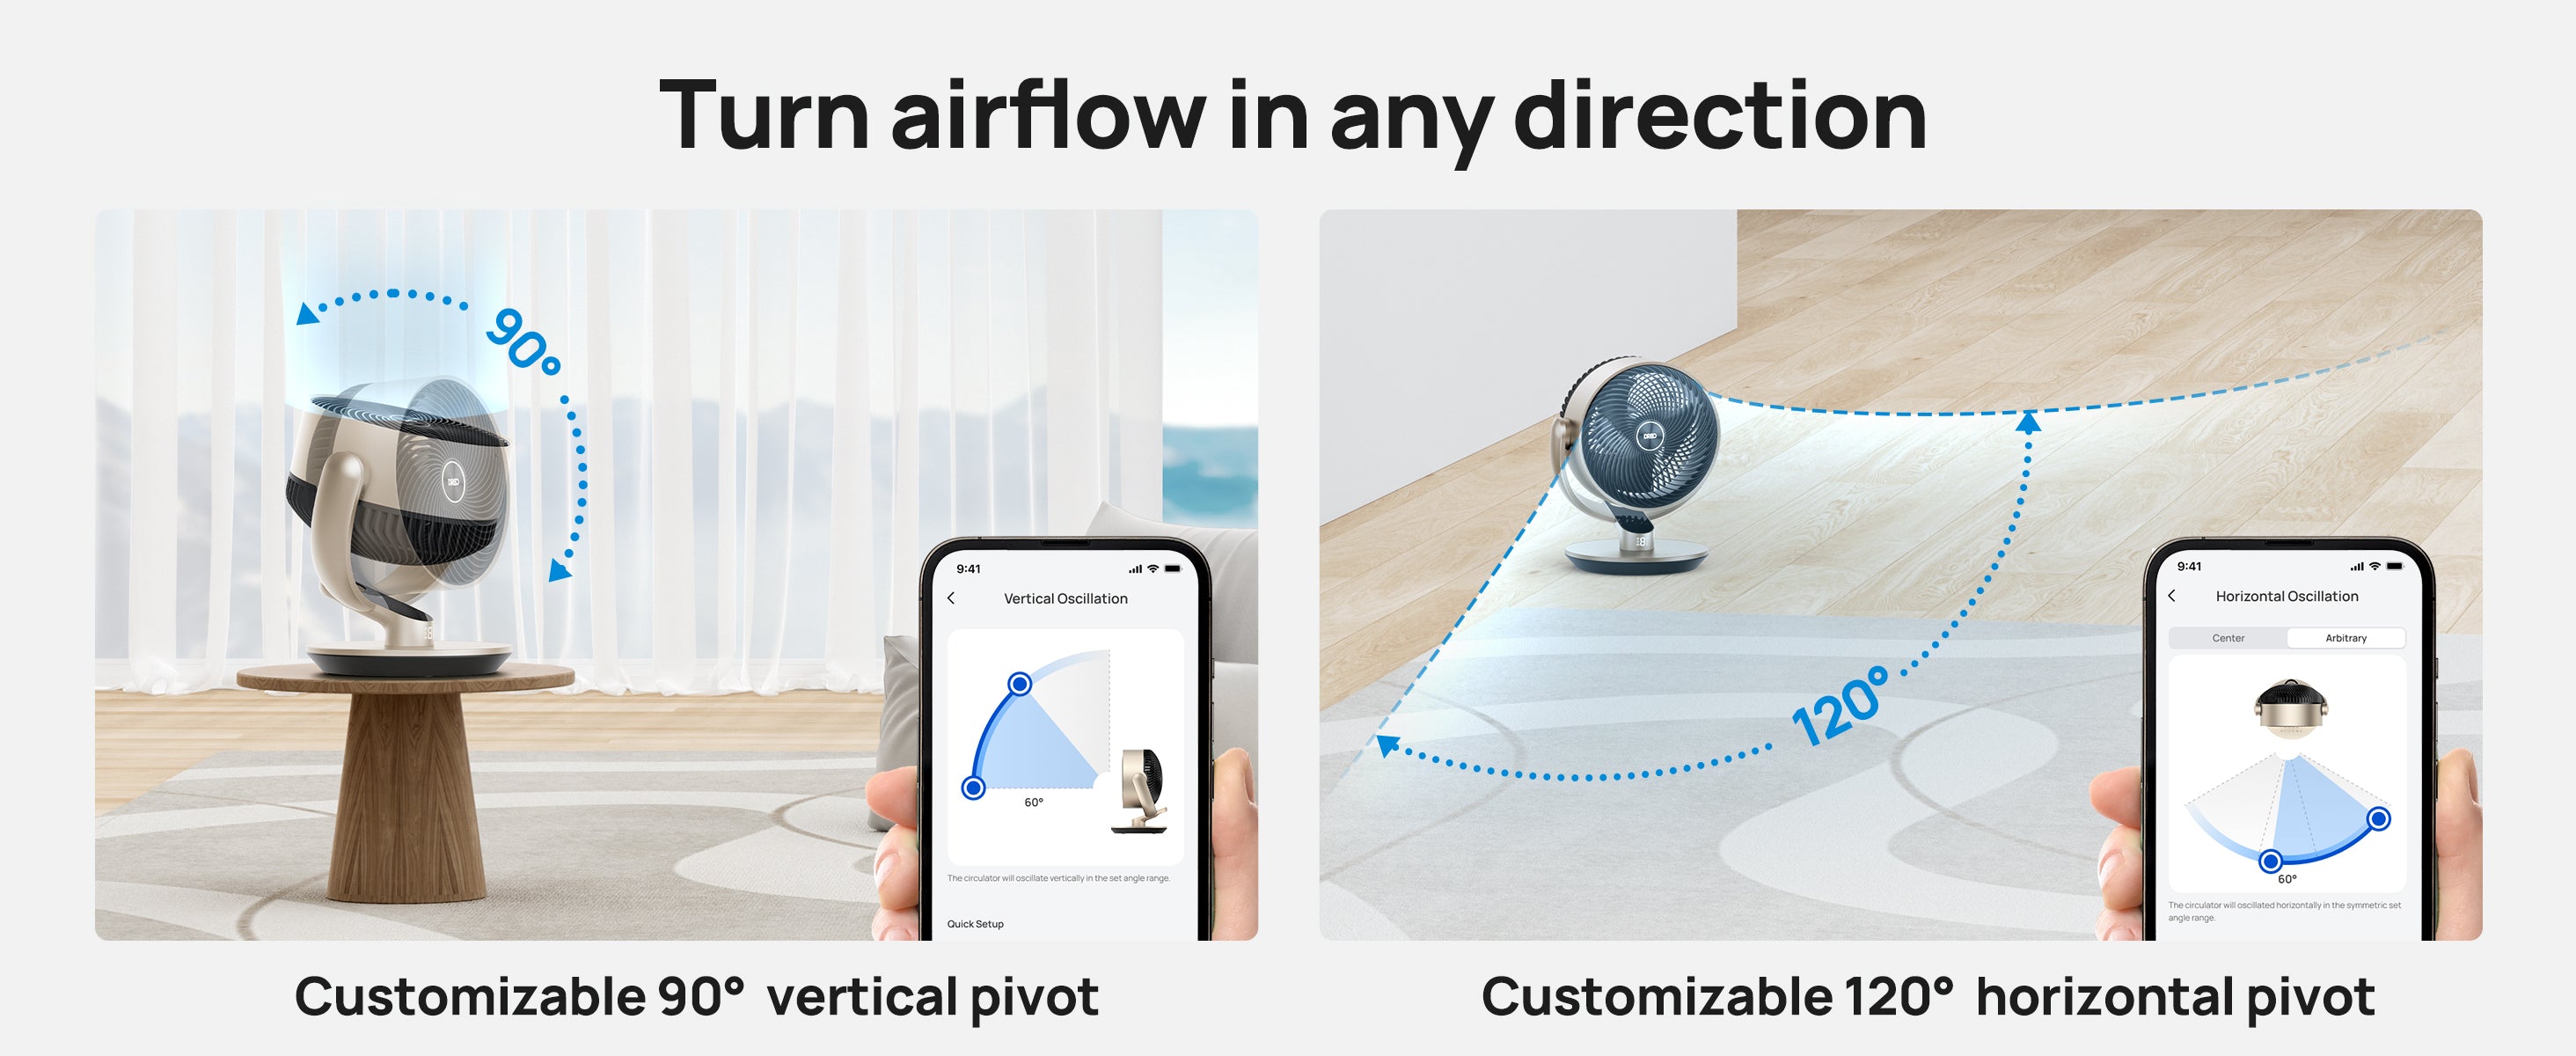 Turn airflow in any direction